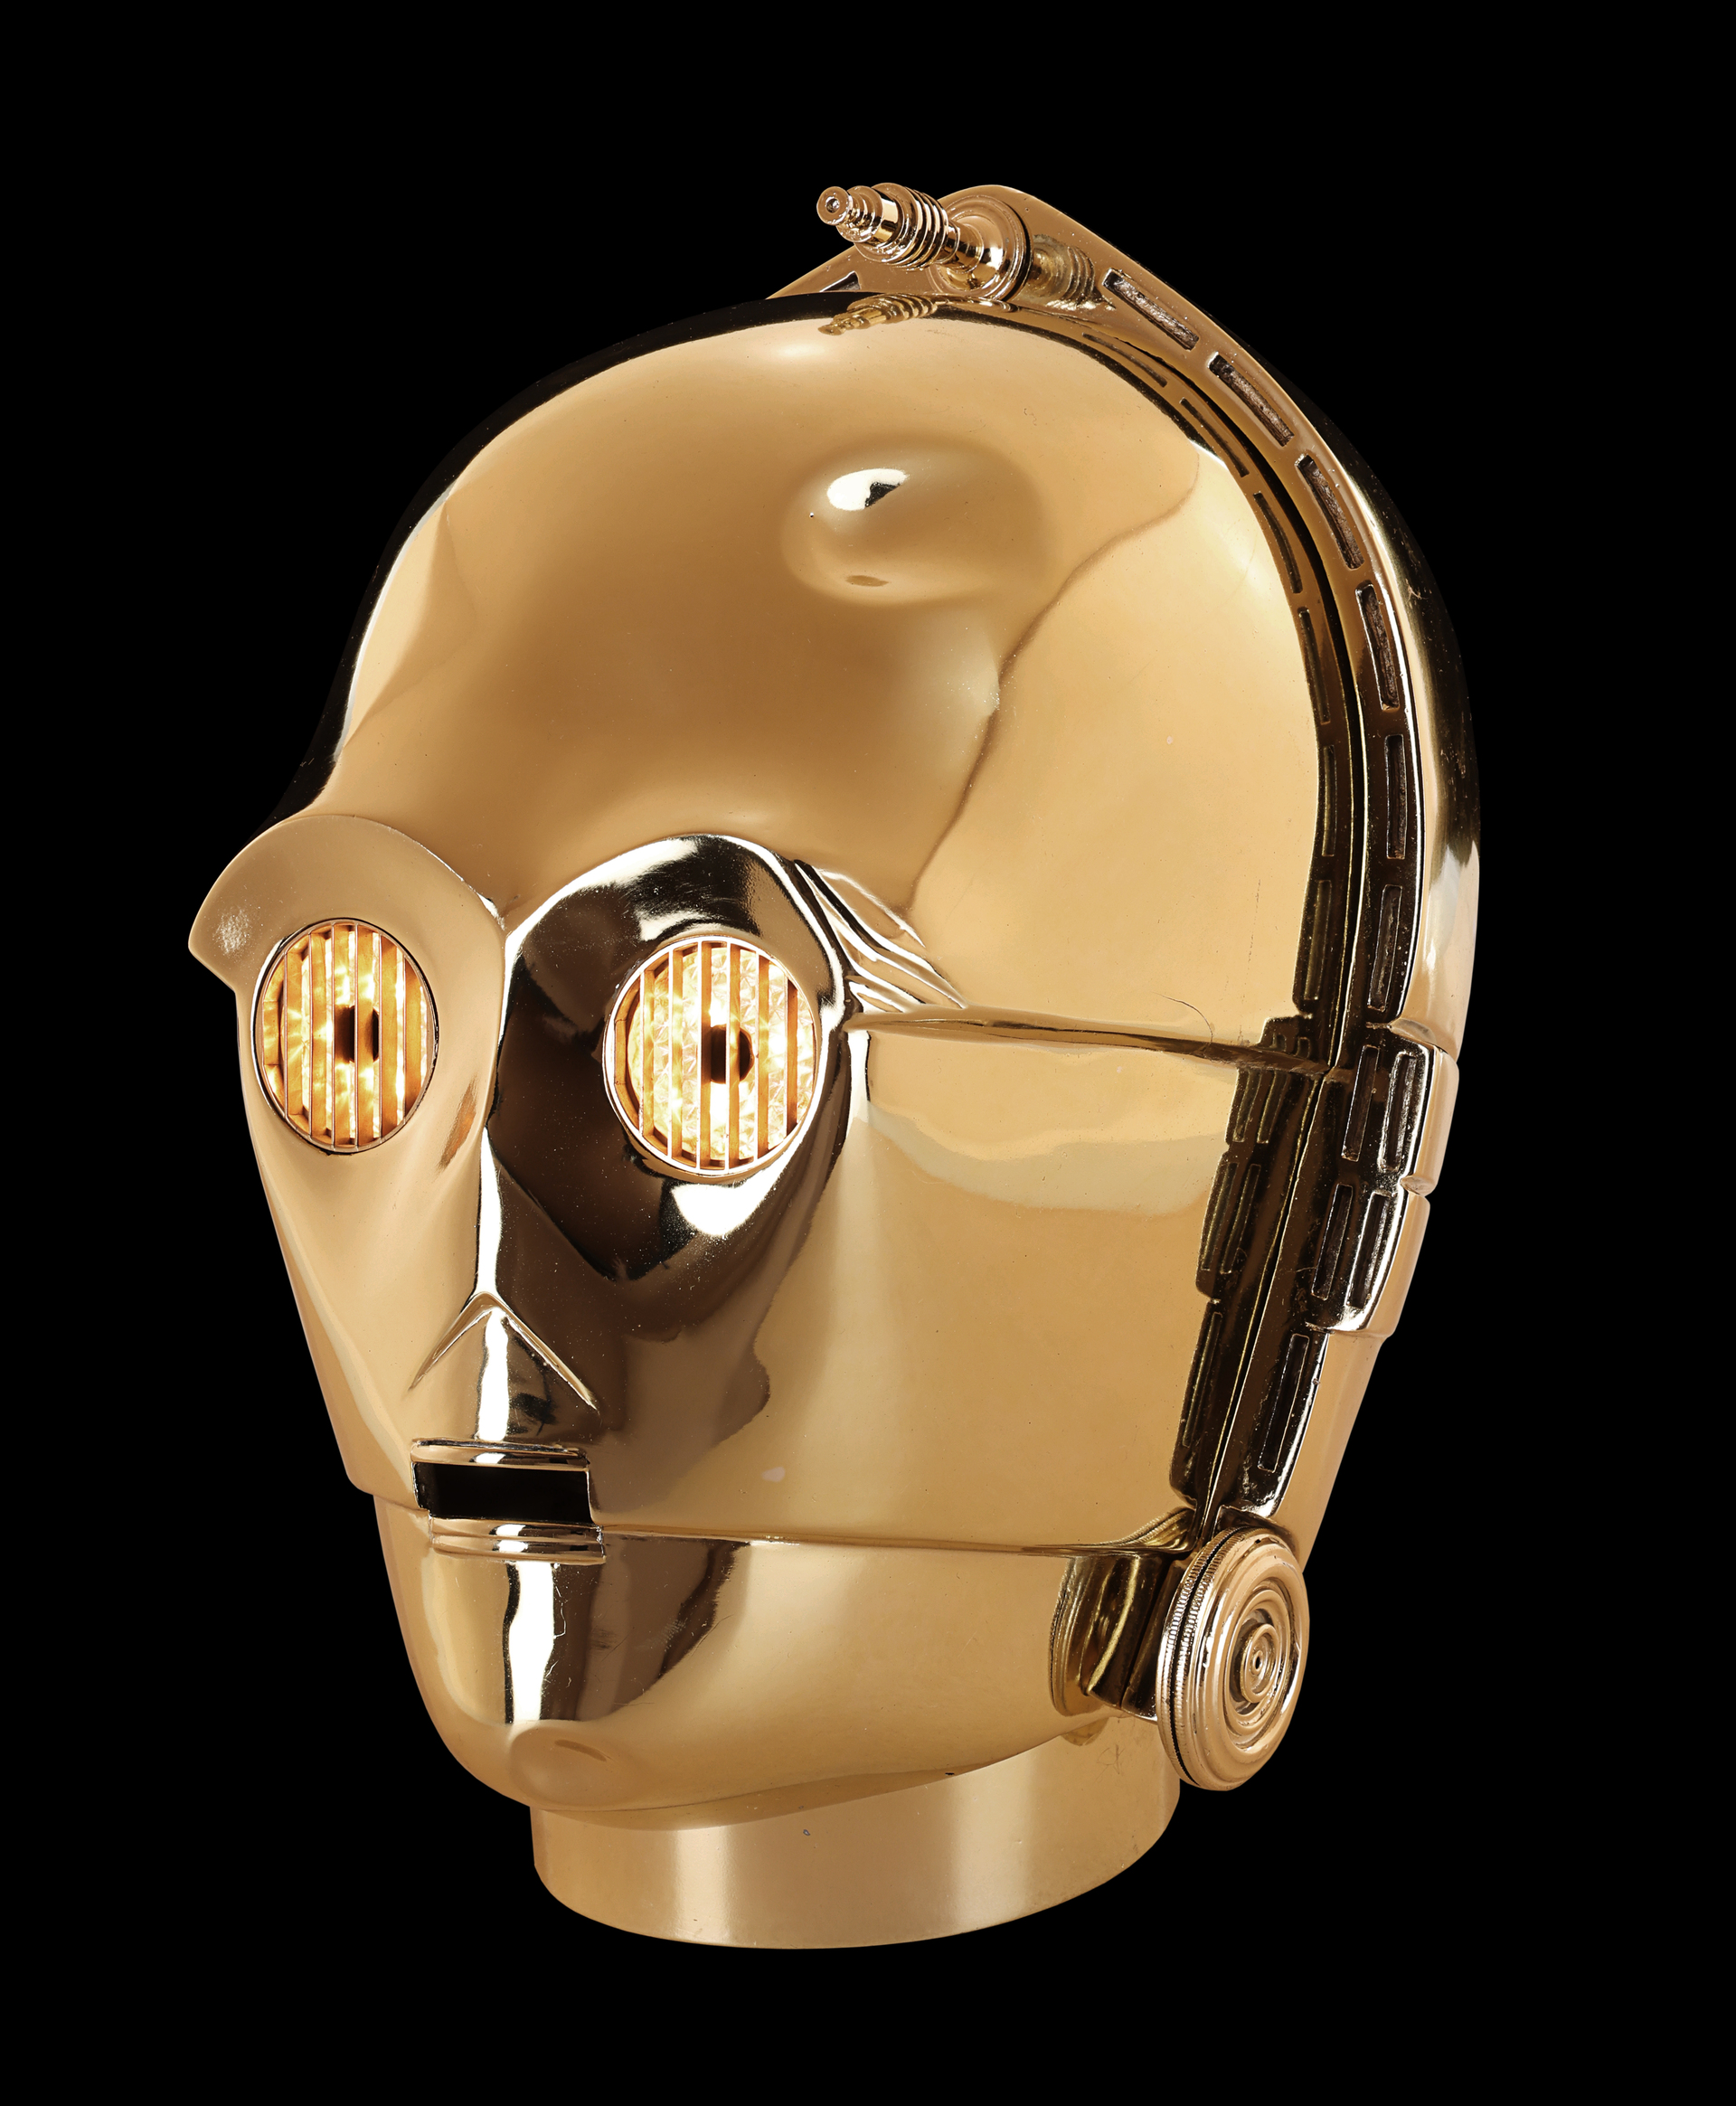 STAR WARS: A NEW HOPE (1977) - Anthony Daniels Collection: Screen-matched Light-up C-3PO (Anthony Da - Image 5 of 42